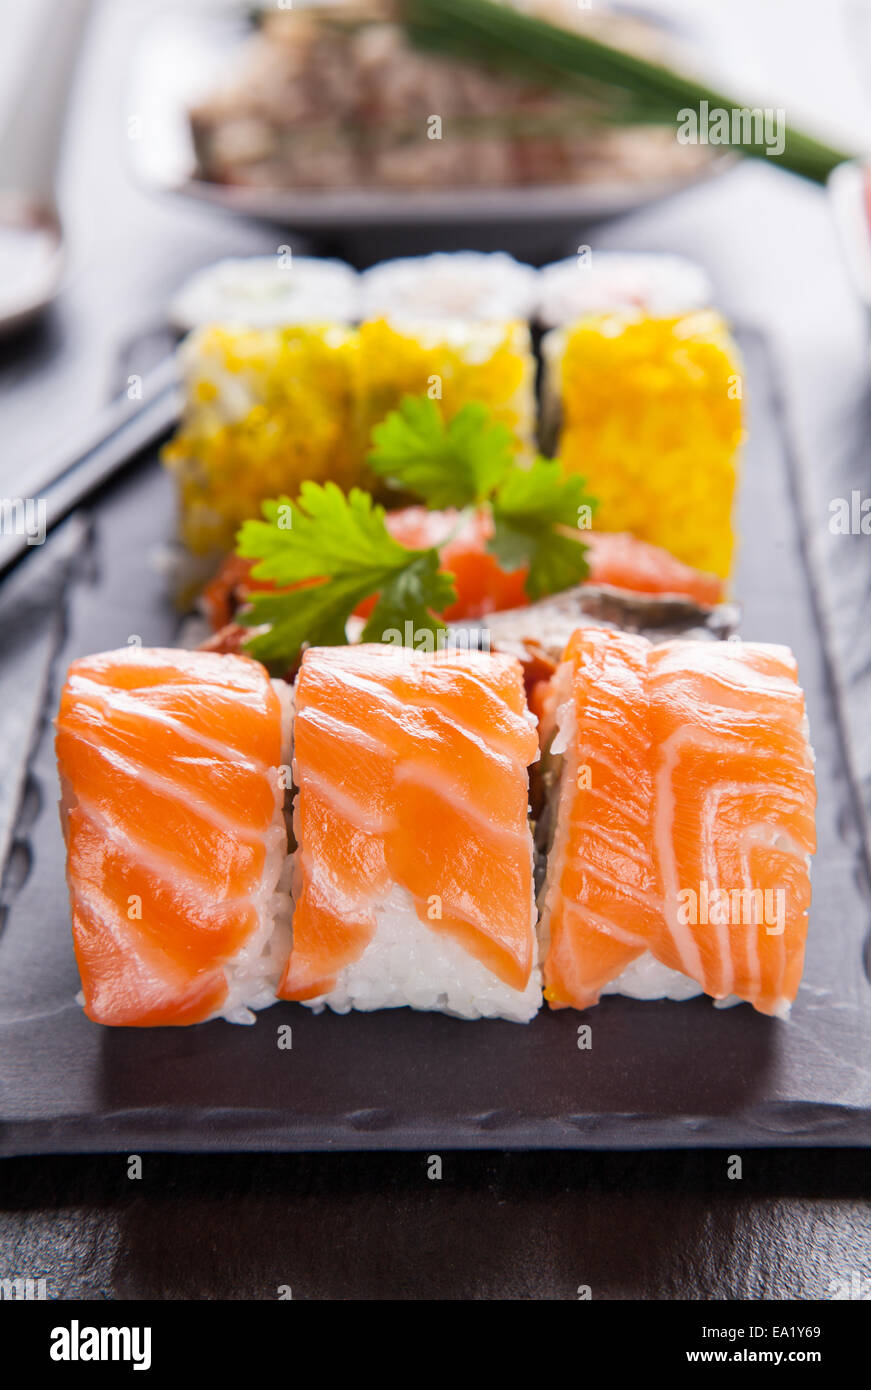 Various kinds of sushi food served on black stone Stock Photo